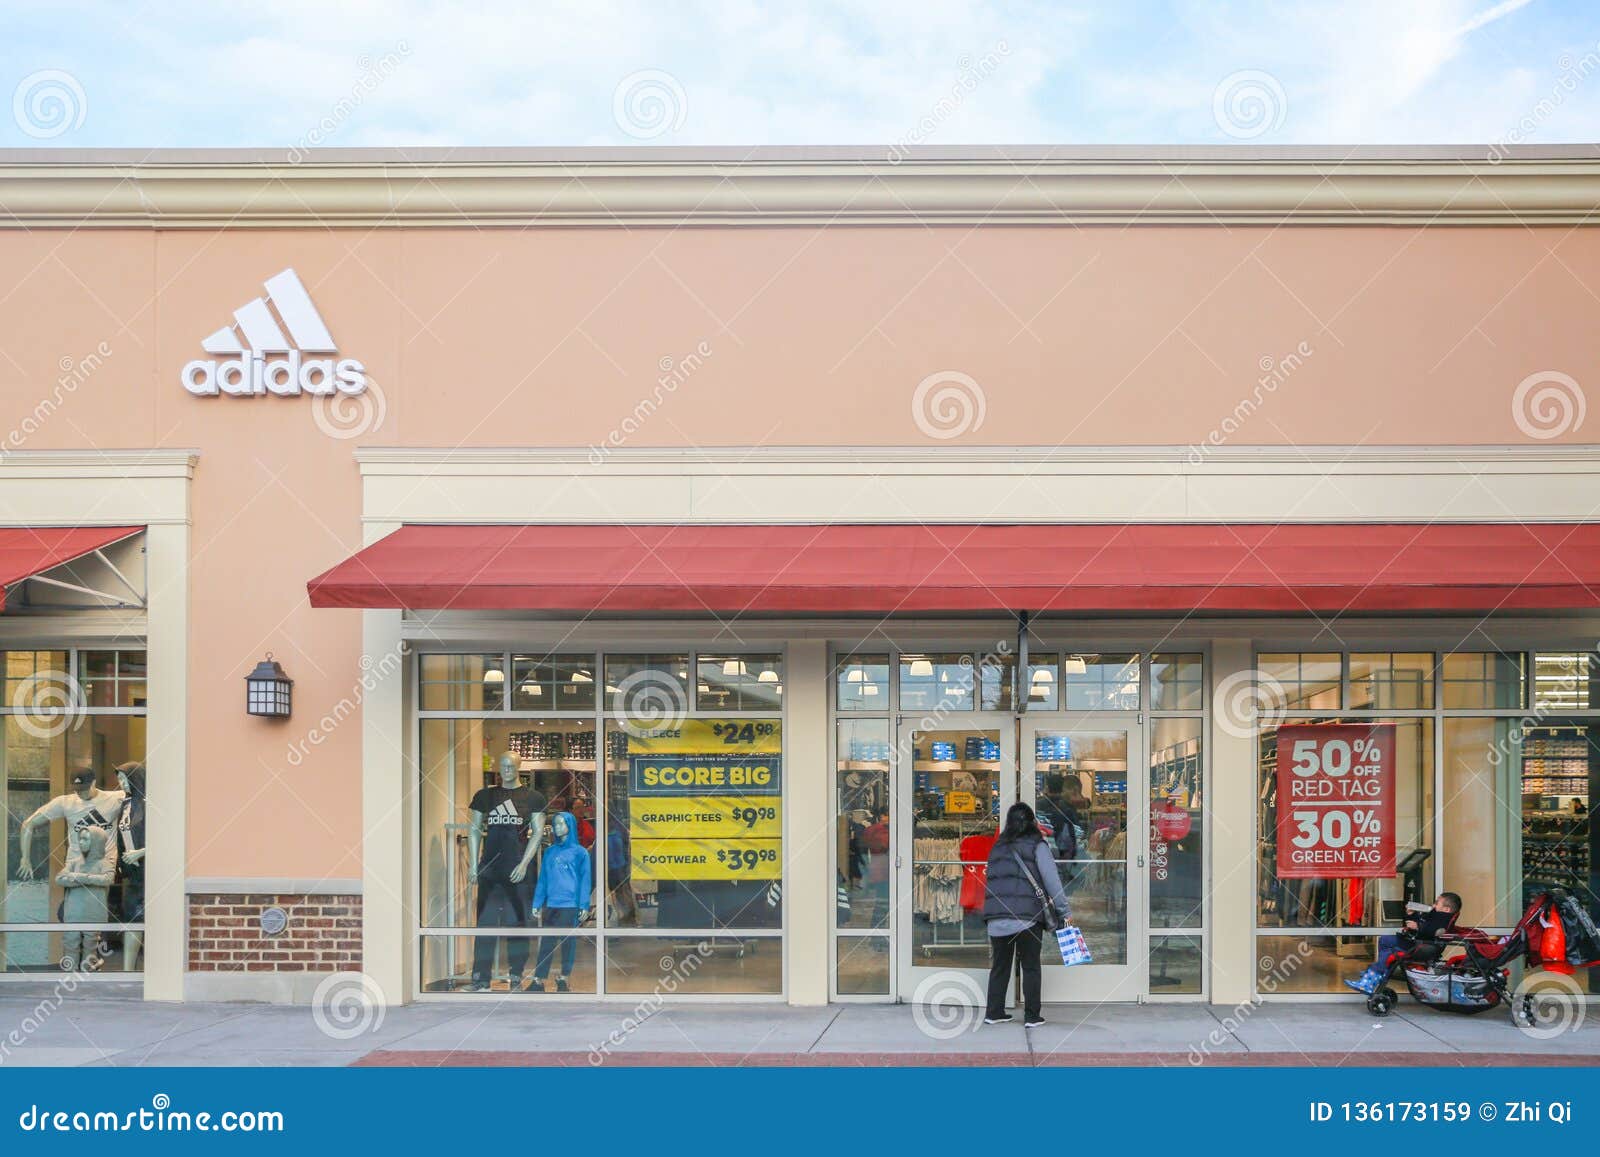 adidas store usa outlet